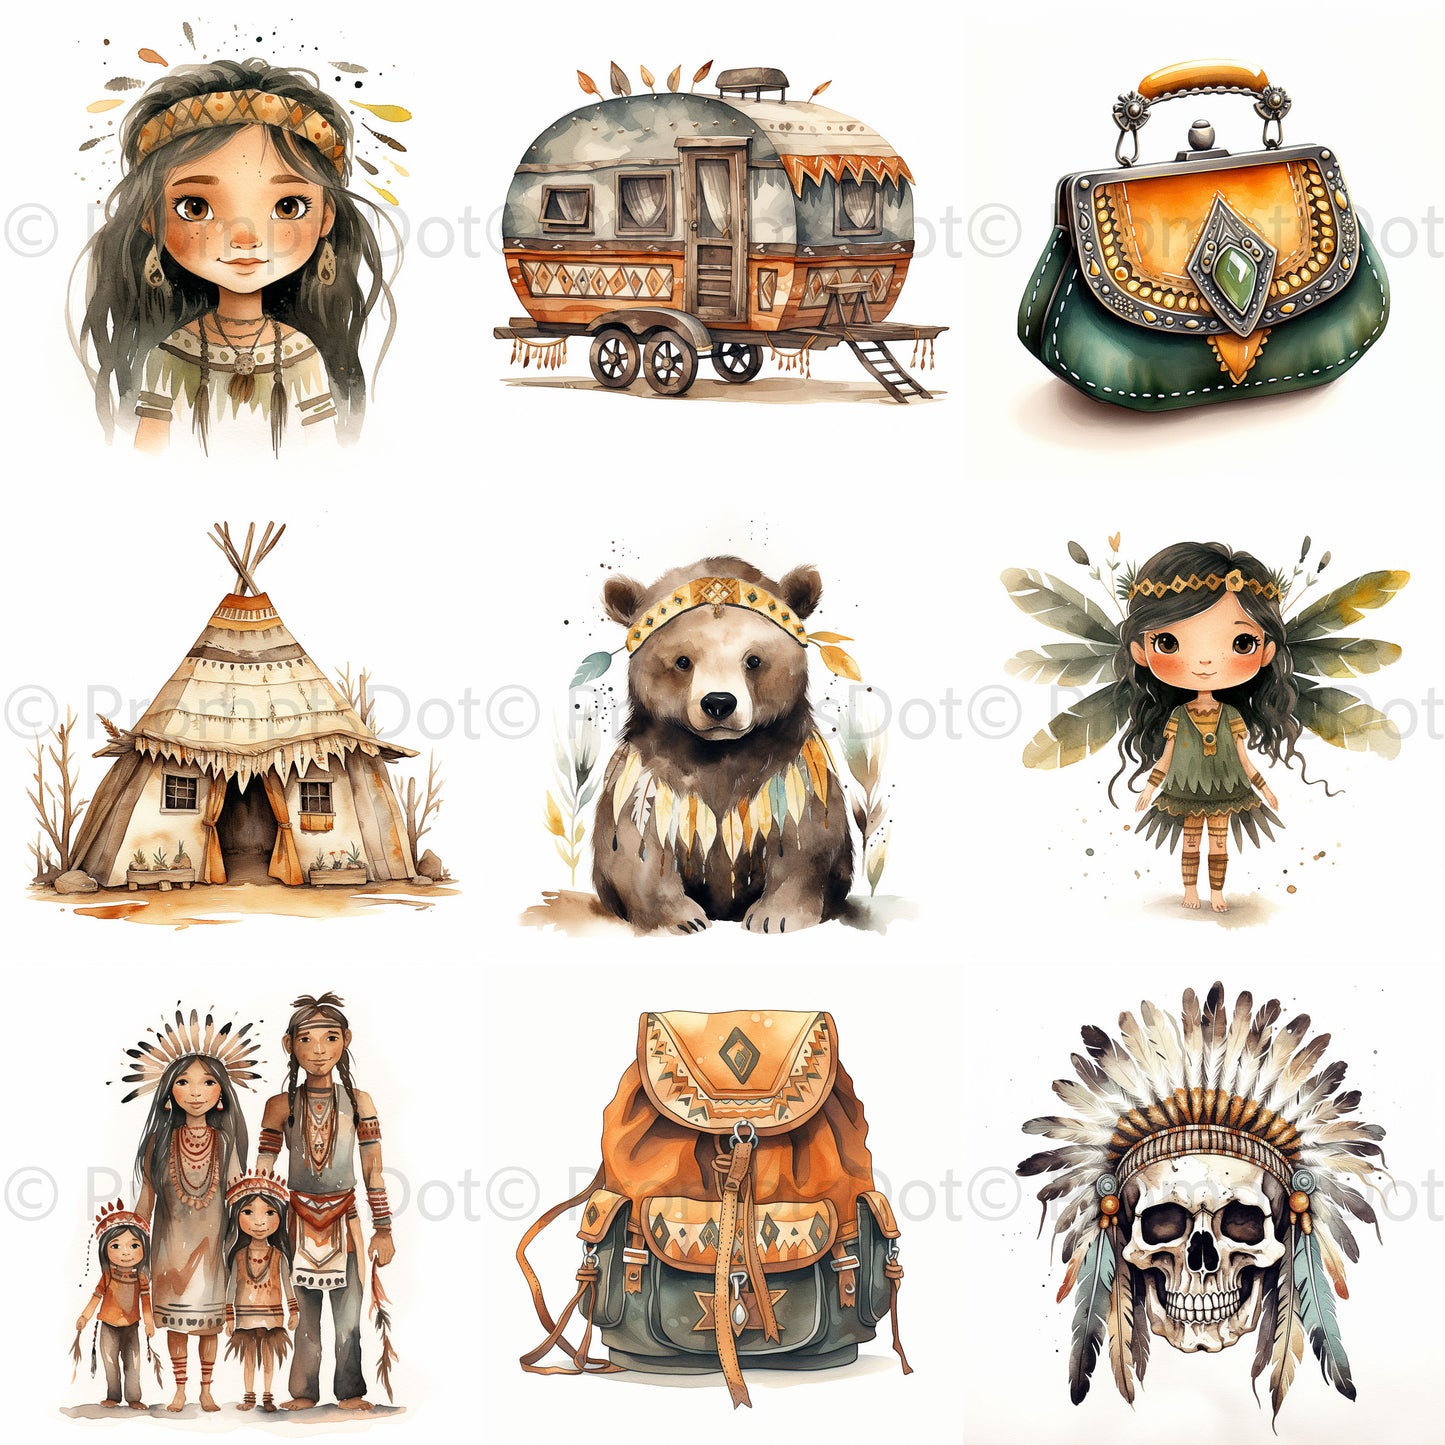 Cute Native Watercolor Indian Art Folks Digital Art and Midjourney Prompt Commercial Use